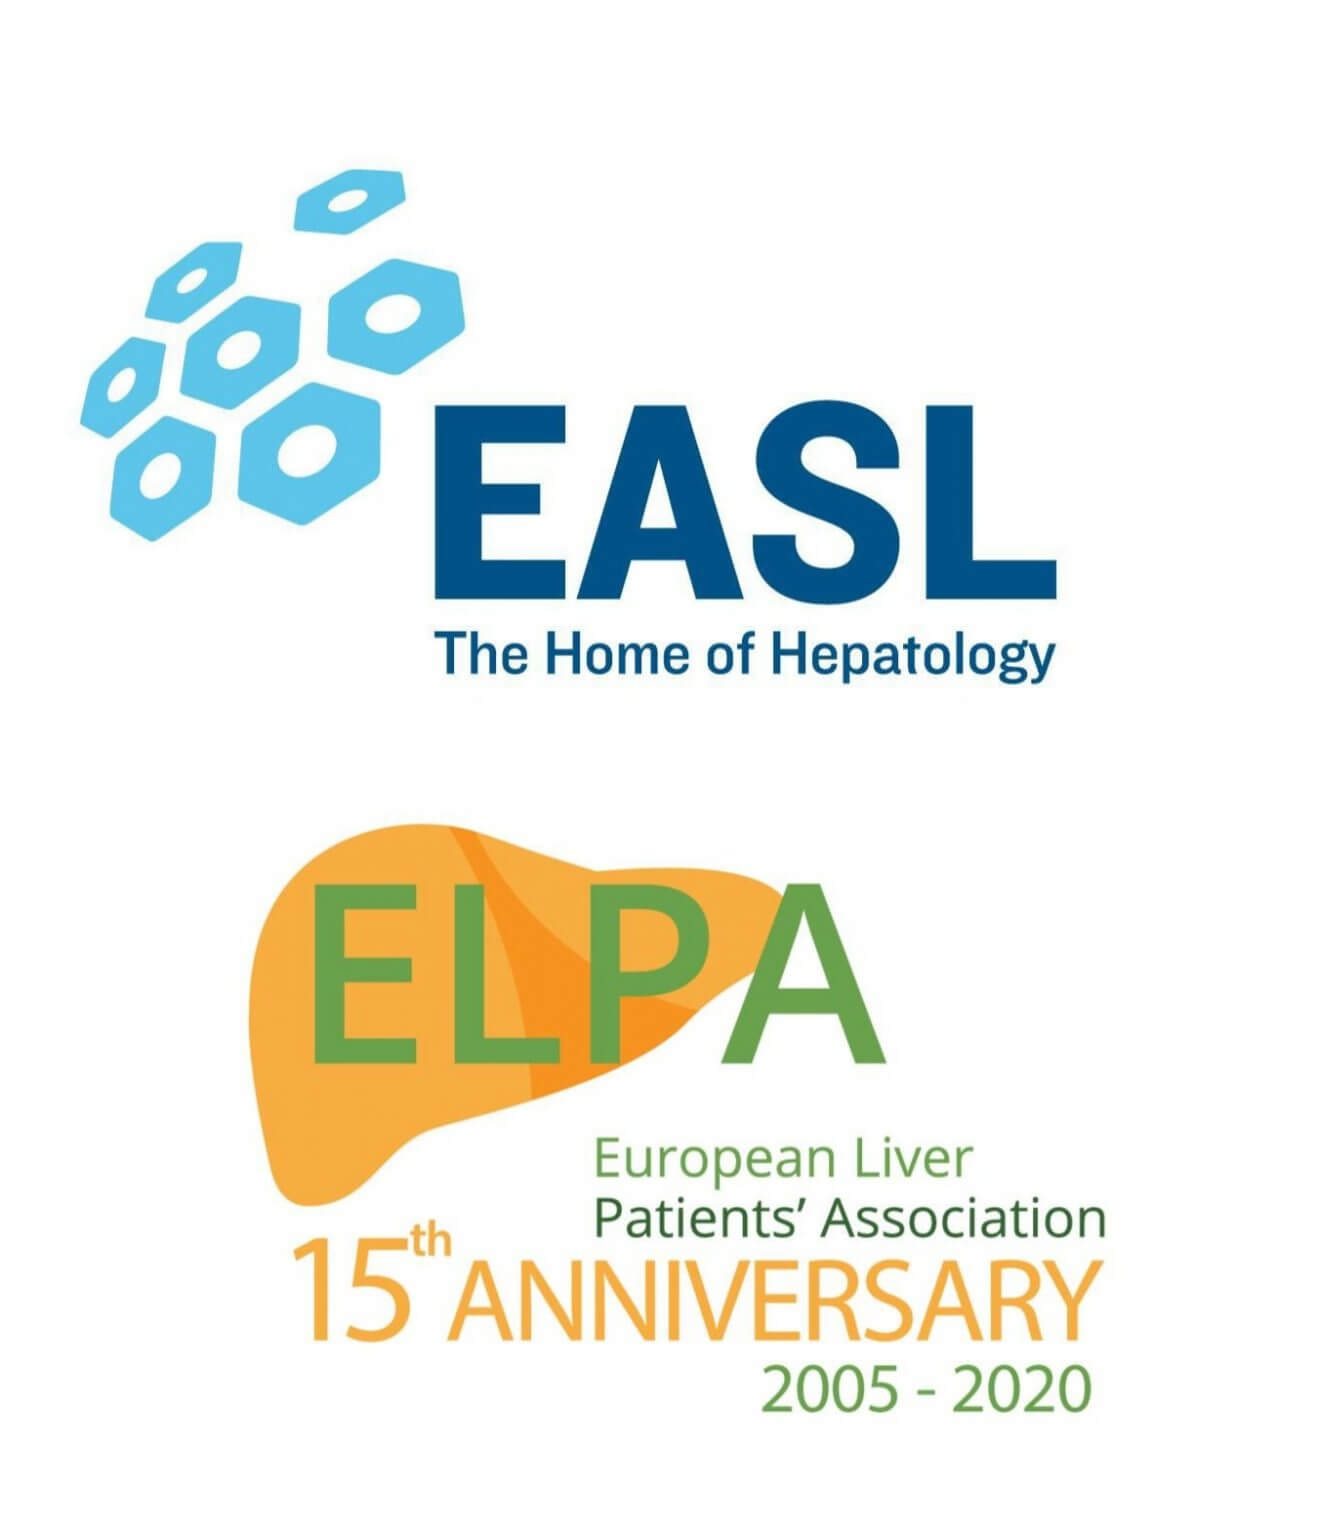 ELPA joined the EASL Patient Groups Community